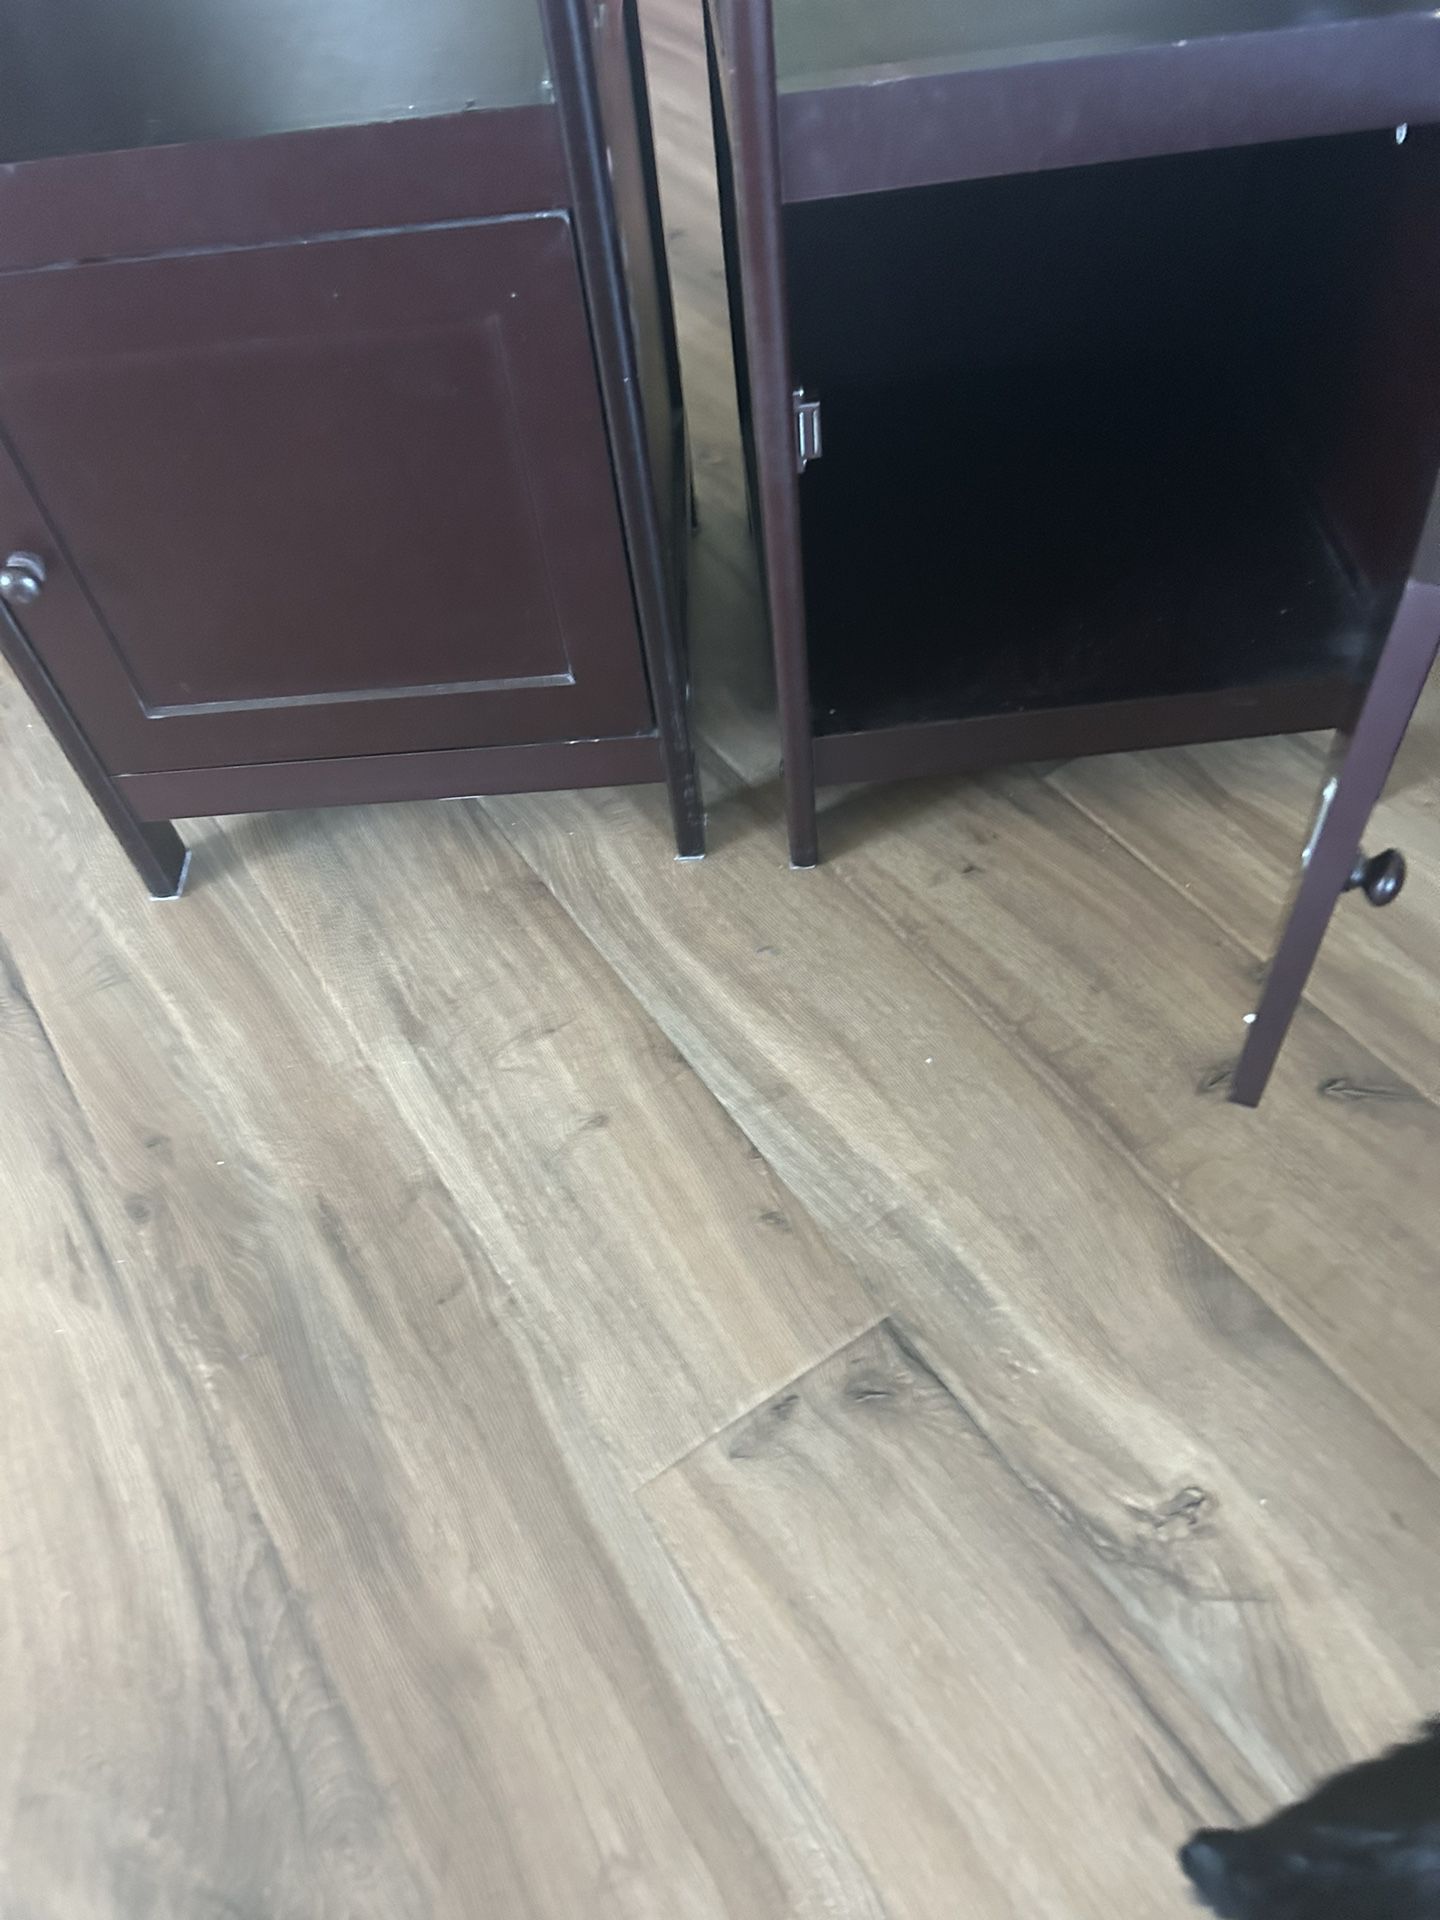 Brown End Tables 